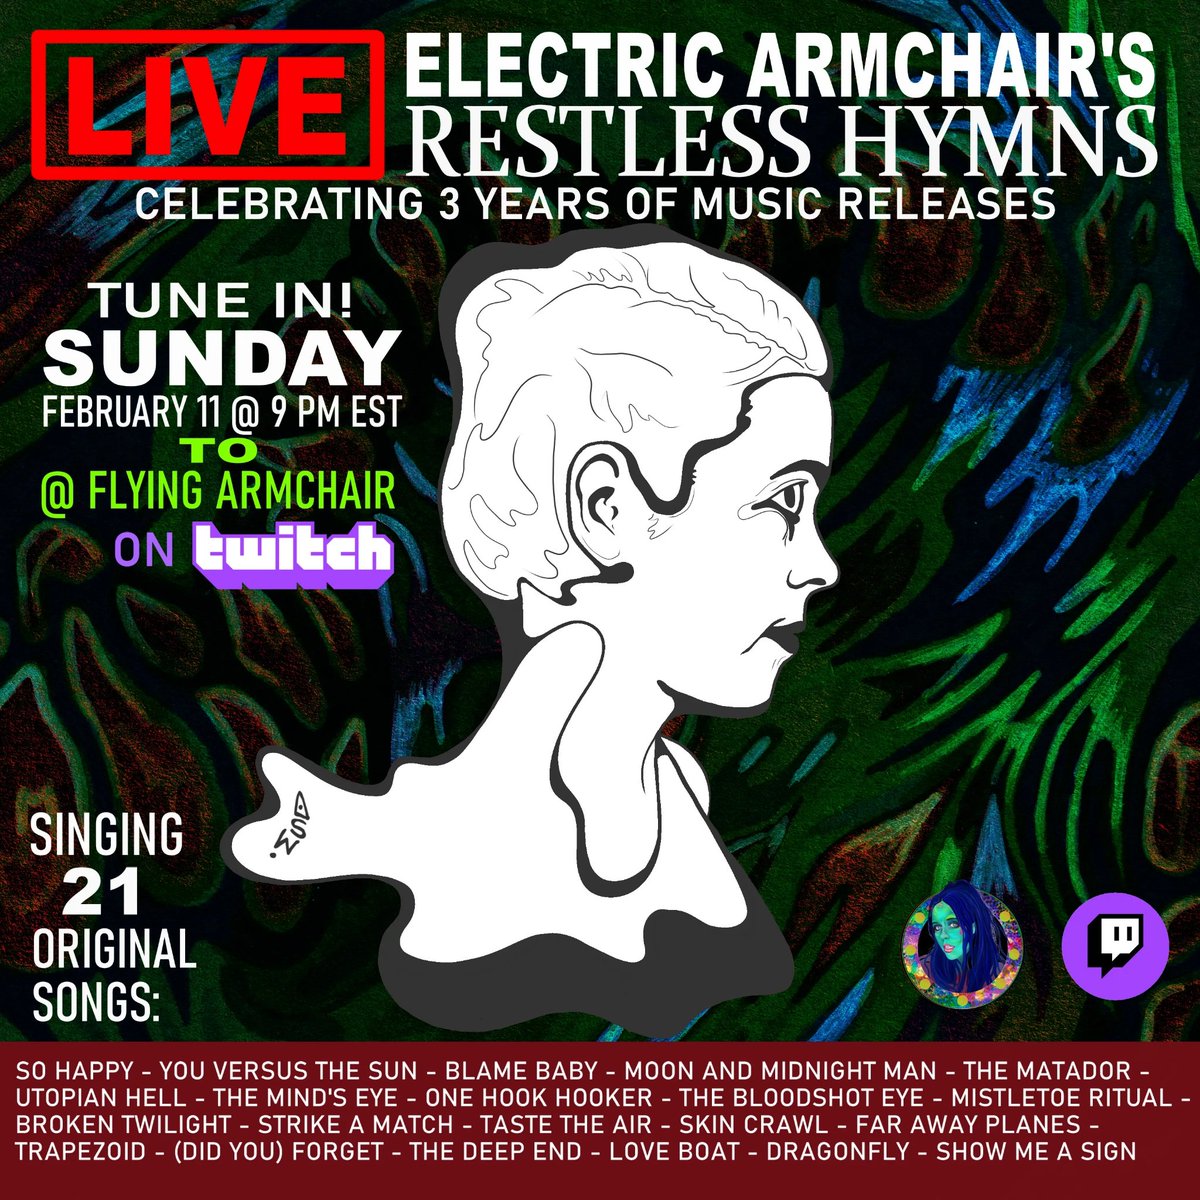 To celebrate 3 years of music releases, I'm singing 21 original songs live on Twitch today @ Flying Armchair. Tune in at 9 pm EST tonight!